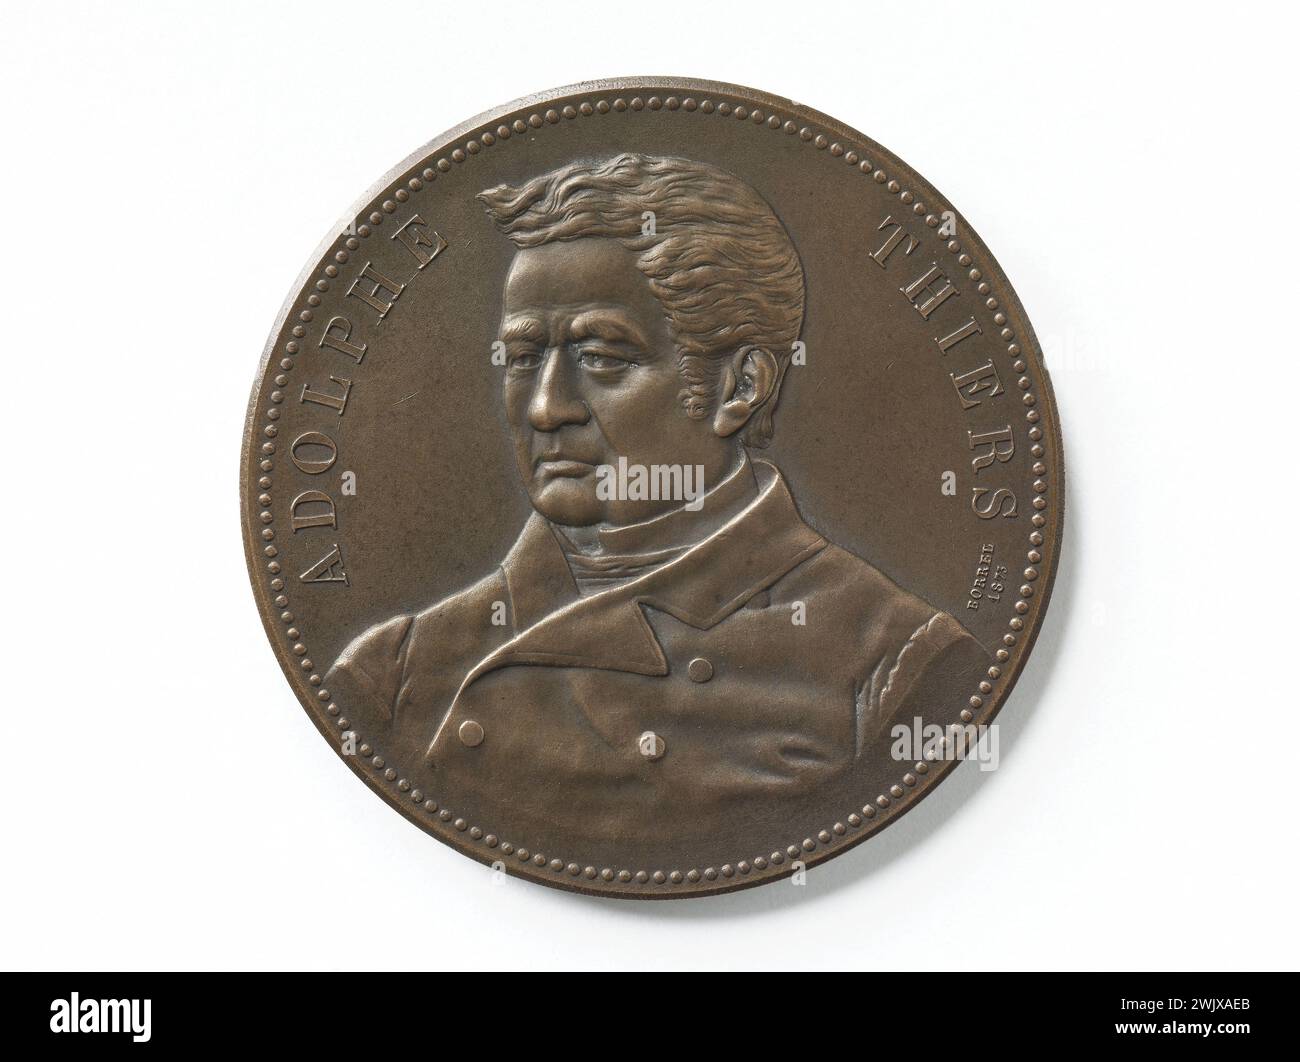 Alfred Borrel (1836-1927). Adolphe Thiers (1797-1877), President of the Republic (1871-1873). Copper. 1873. Paris, Carnavalet museum. Copper, French, statesman, medal, numismatics, president of the French republic, portrait, three-quarter, 19th XIX 19th 19th 19th 19th century Stock Photo